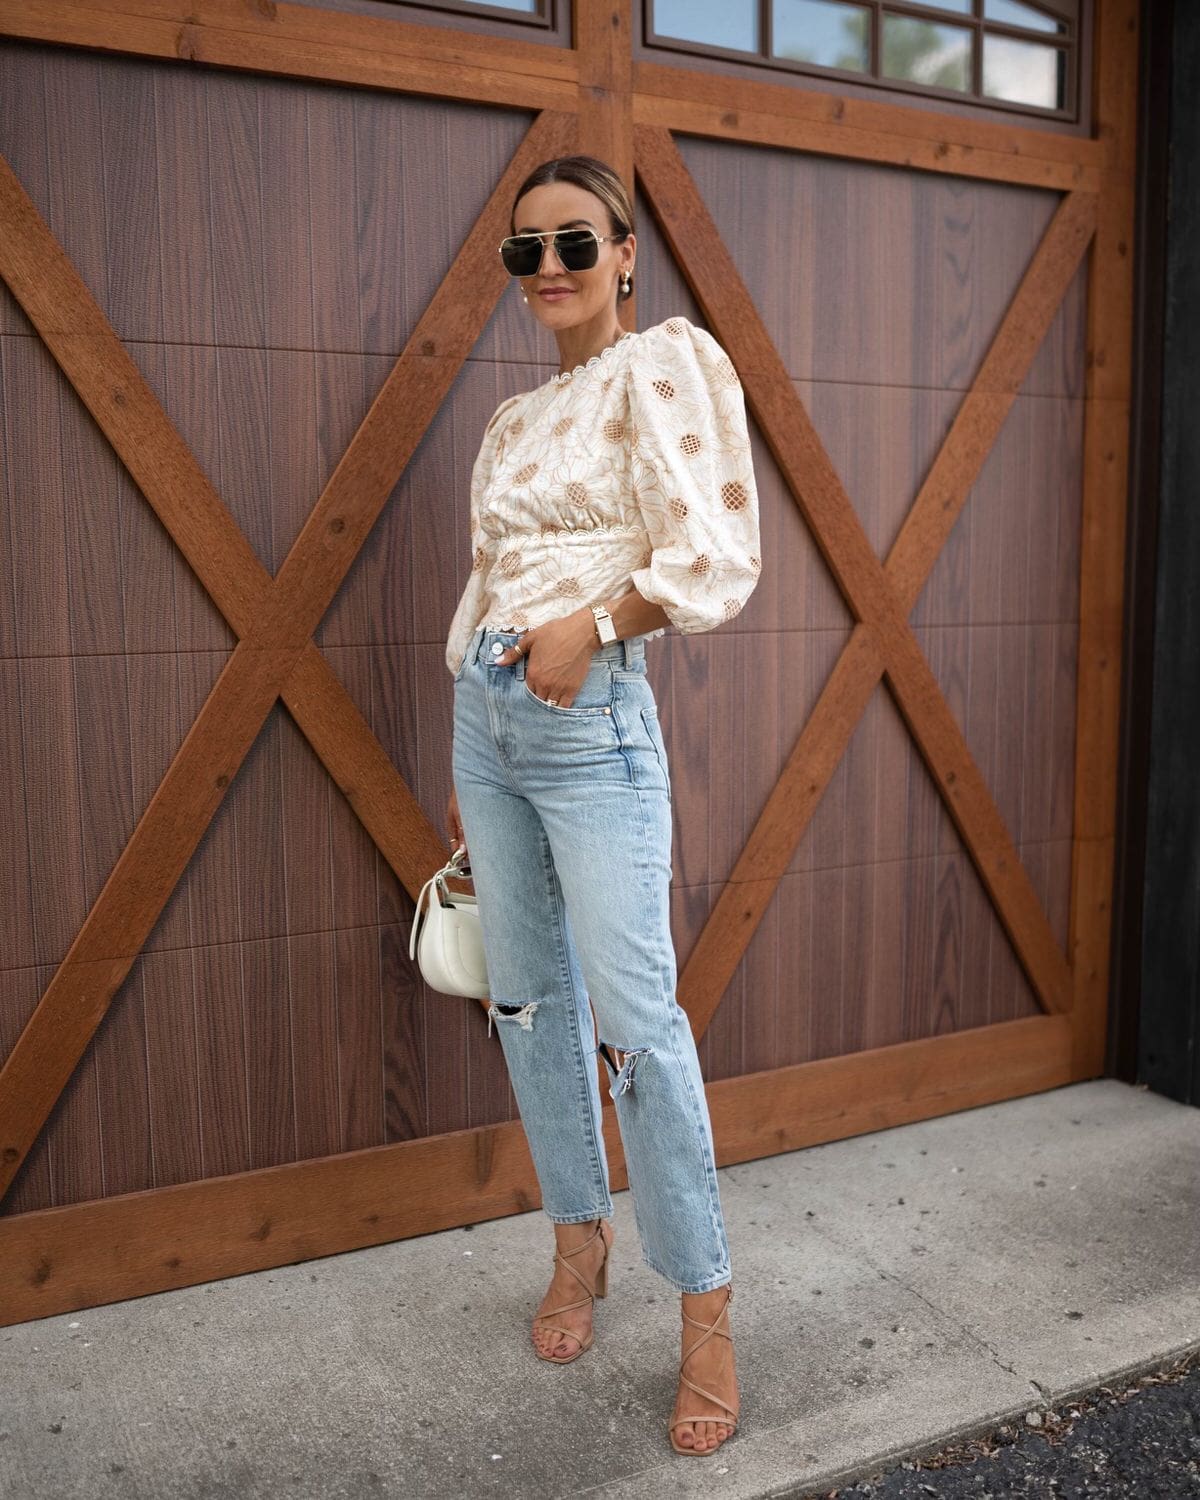 karina wears express jeans with embroidered top